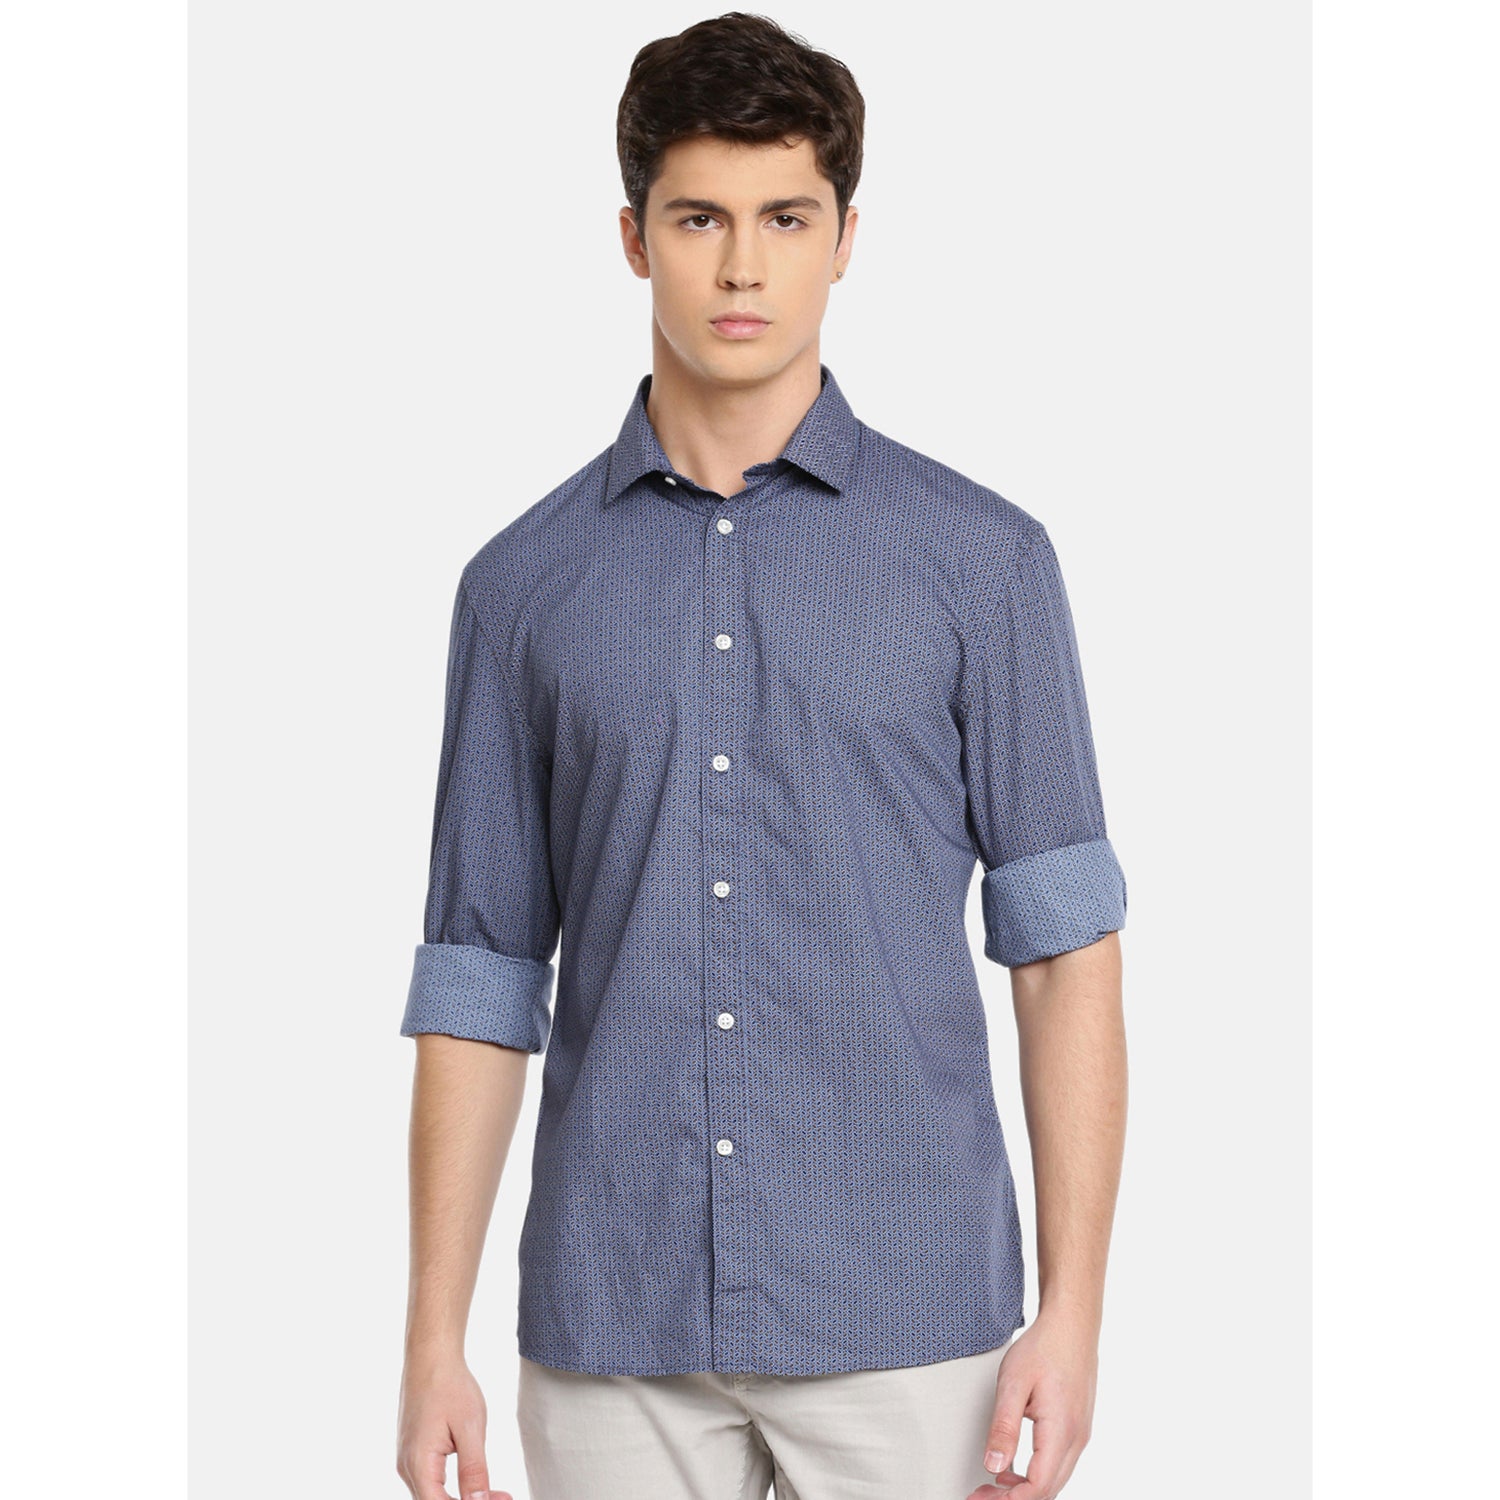 Navy Blue Slim Fit Printed Casual Shirt (PAPARAZZII)